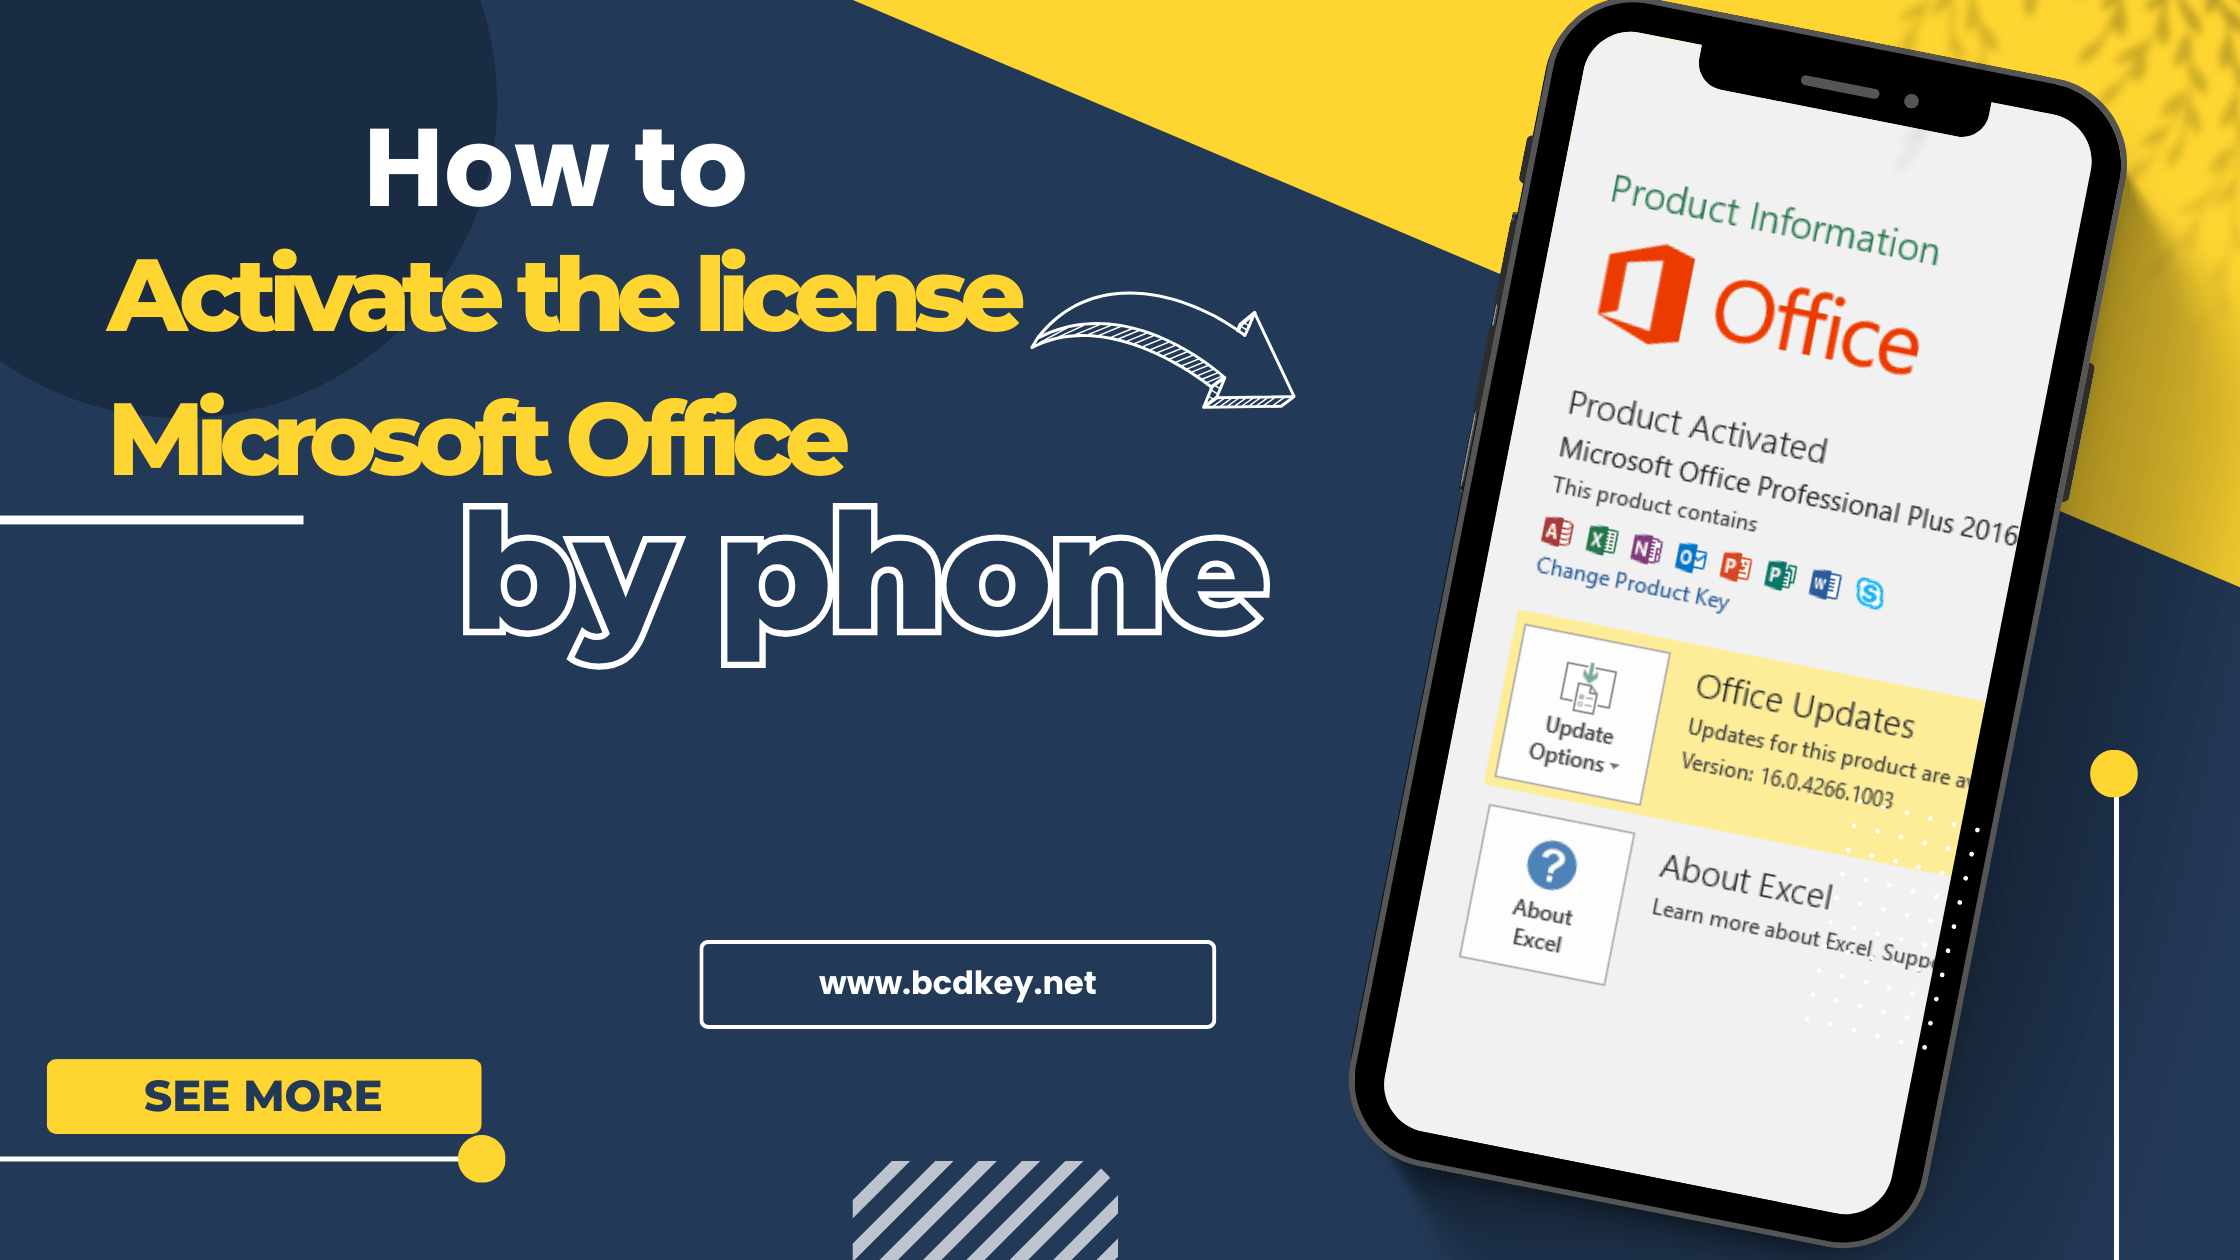 activate your Microsoft Office license by phone